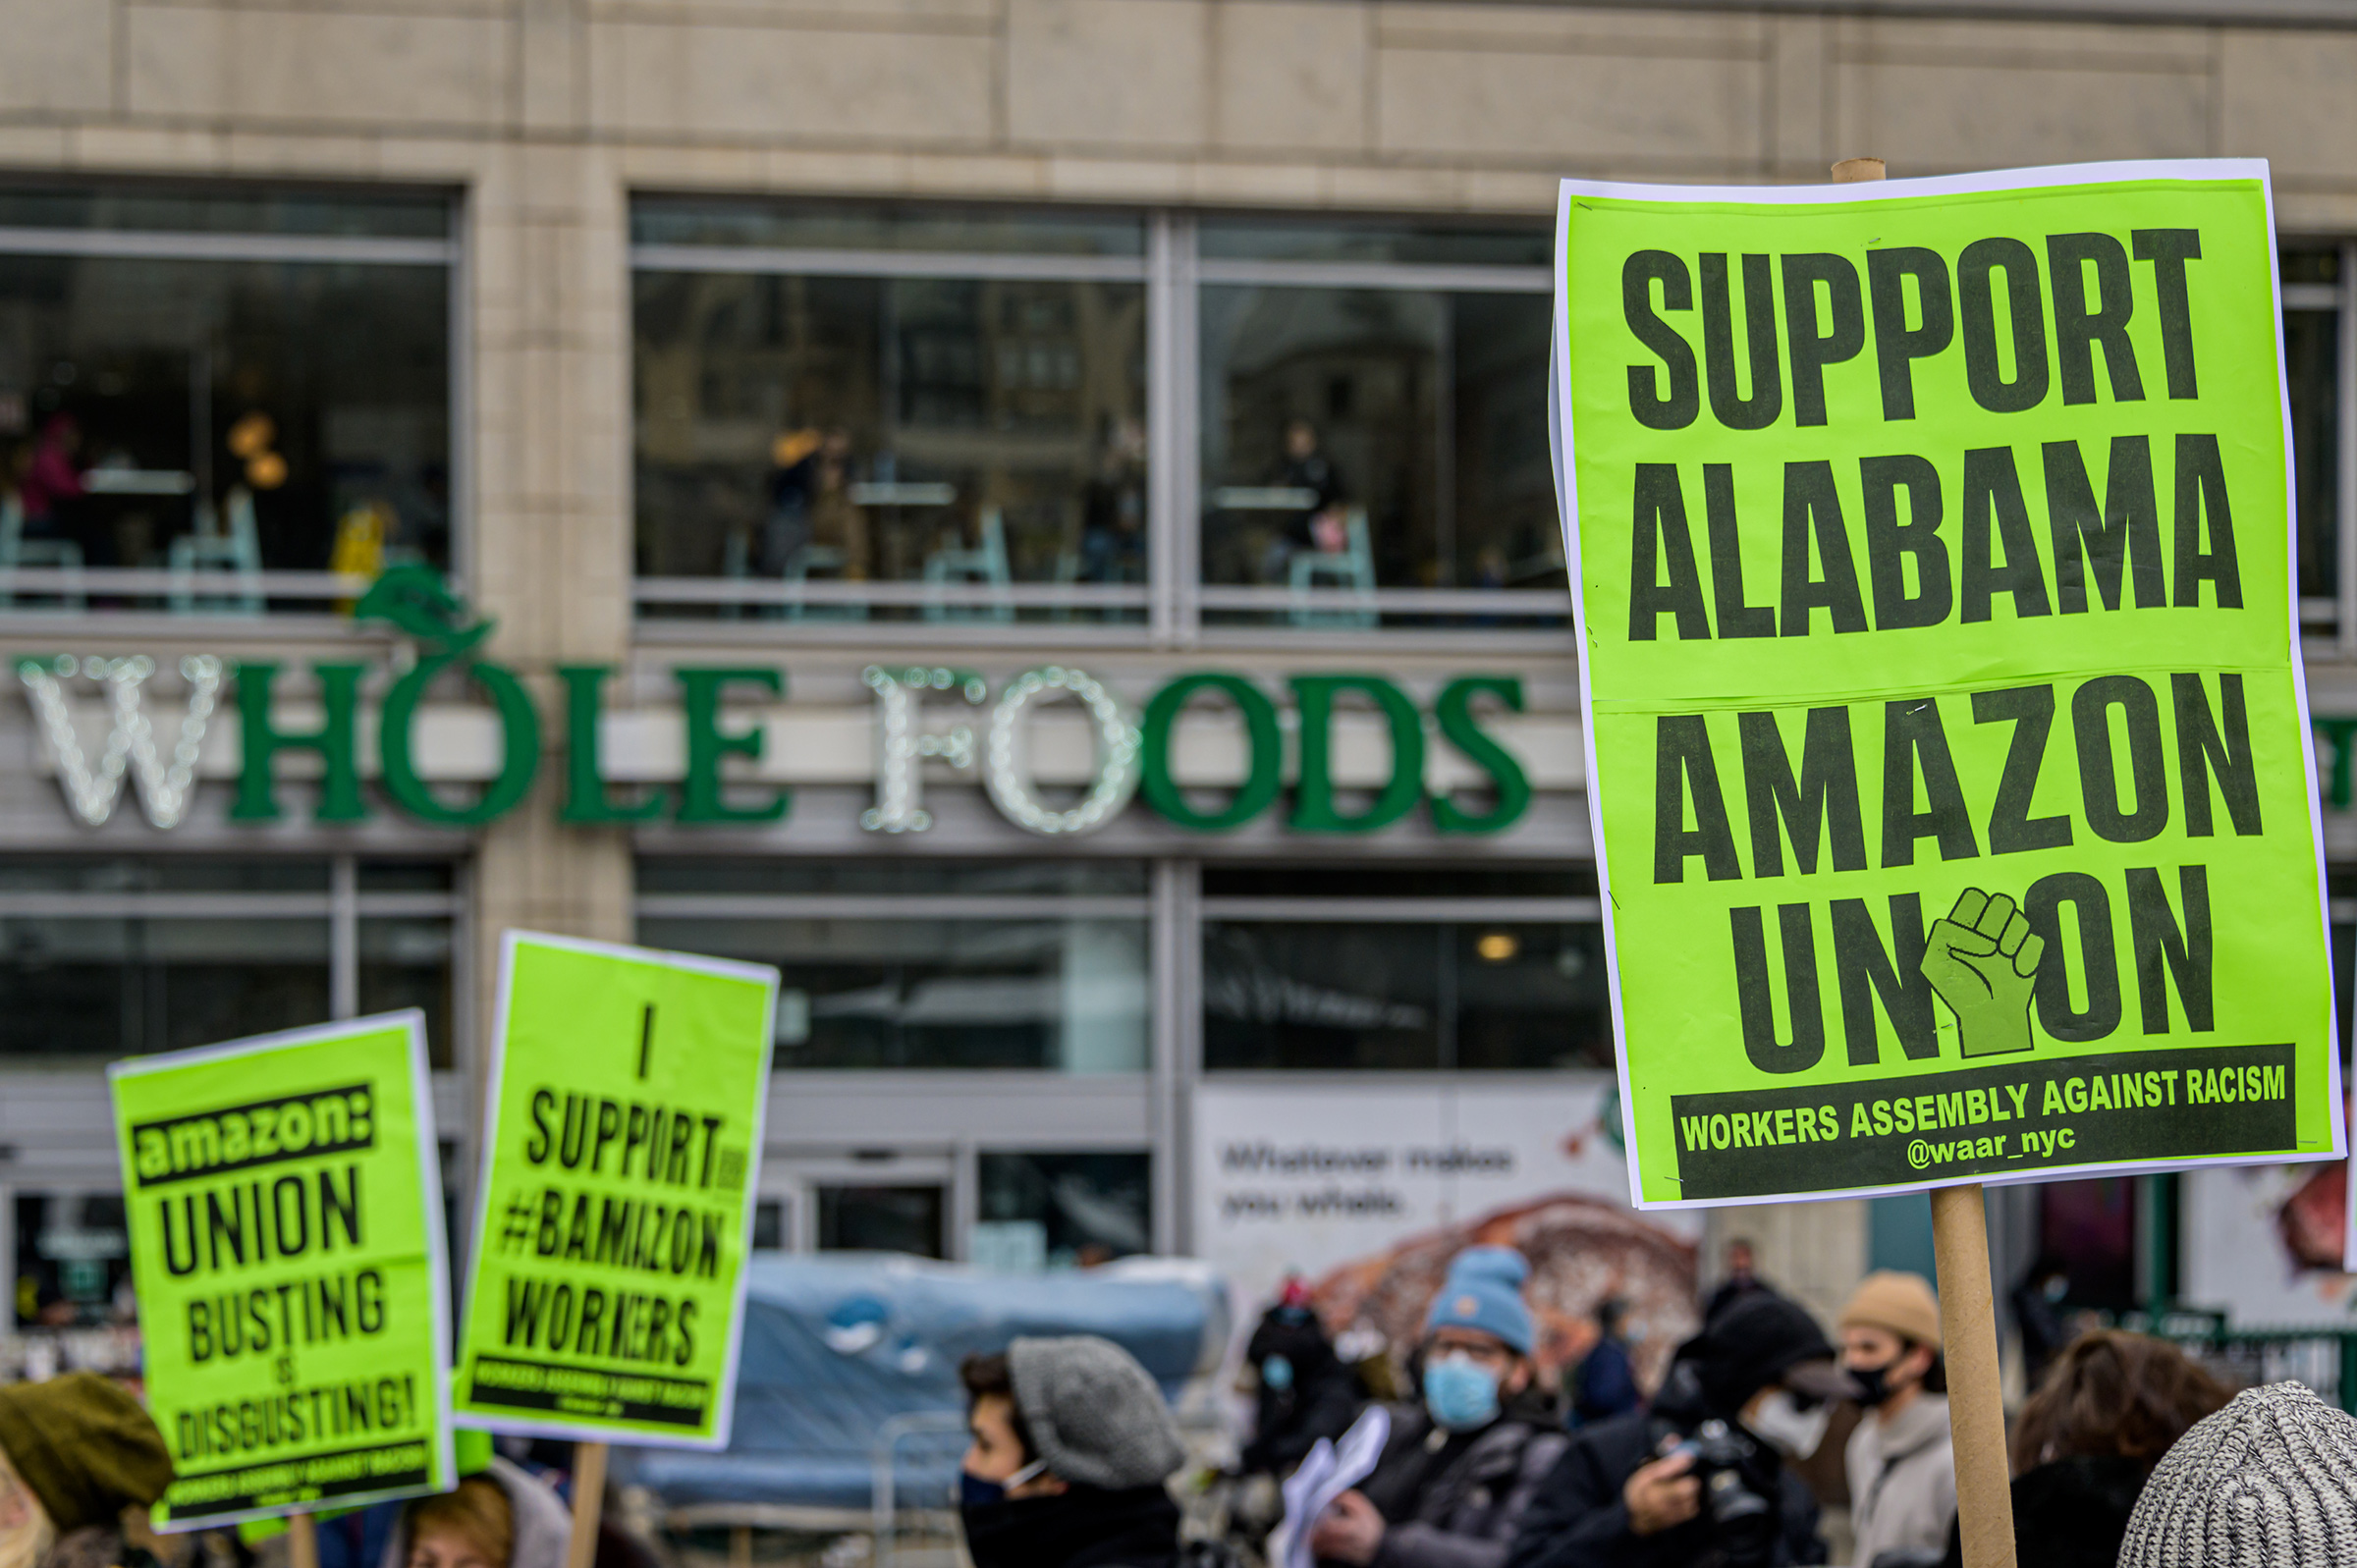 Participants seen holding signs and marching on a picket line at the protest. Members of the Workers Assembly Against Racism gathered across from Jeff Bezos-owned Whole Foods Market in Union Square South for a nation-wide solidarity event with the unionizing Amazon workers in Bessemer, Alabama. (Erik McGregor—LightRocket/Getty Images)